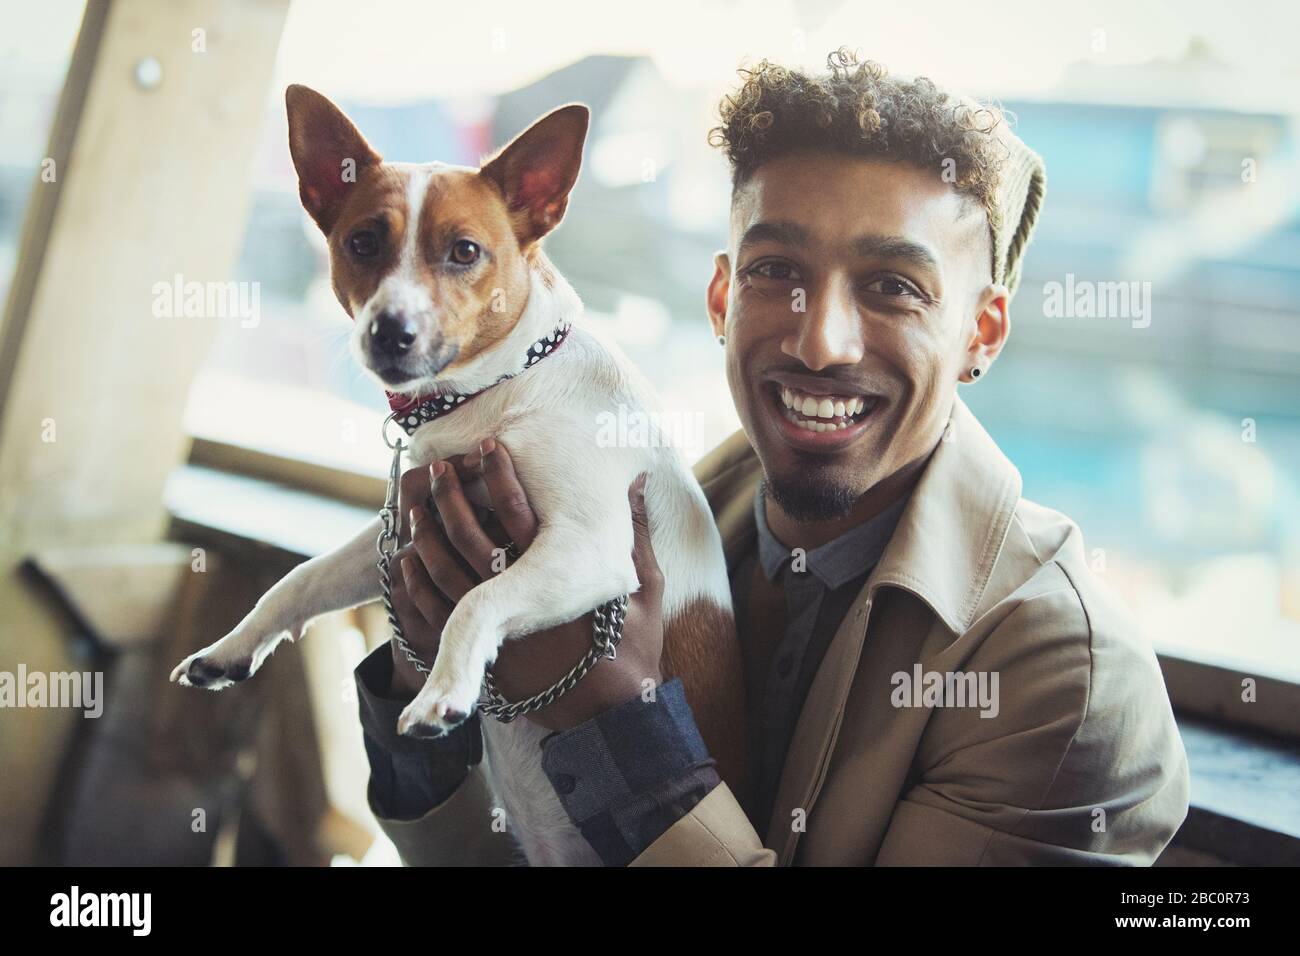 Portrait smiling young man holding dog Stock Photo